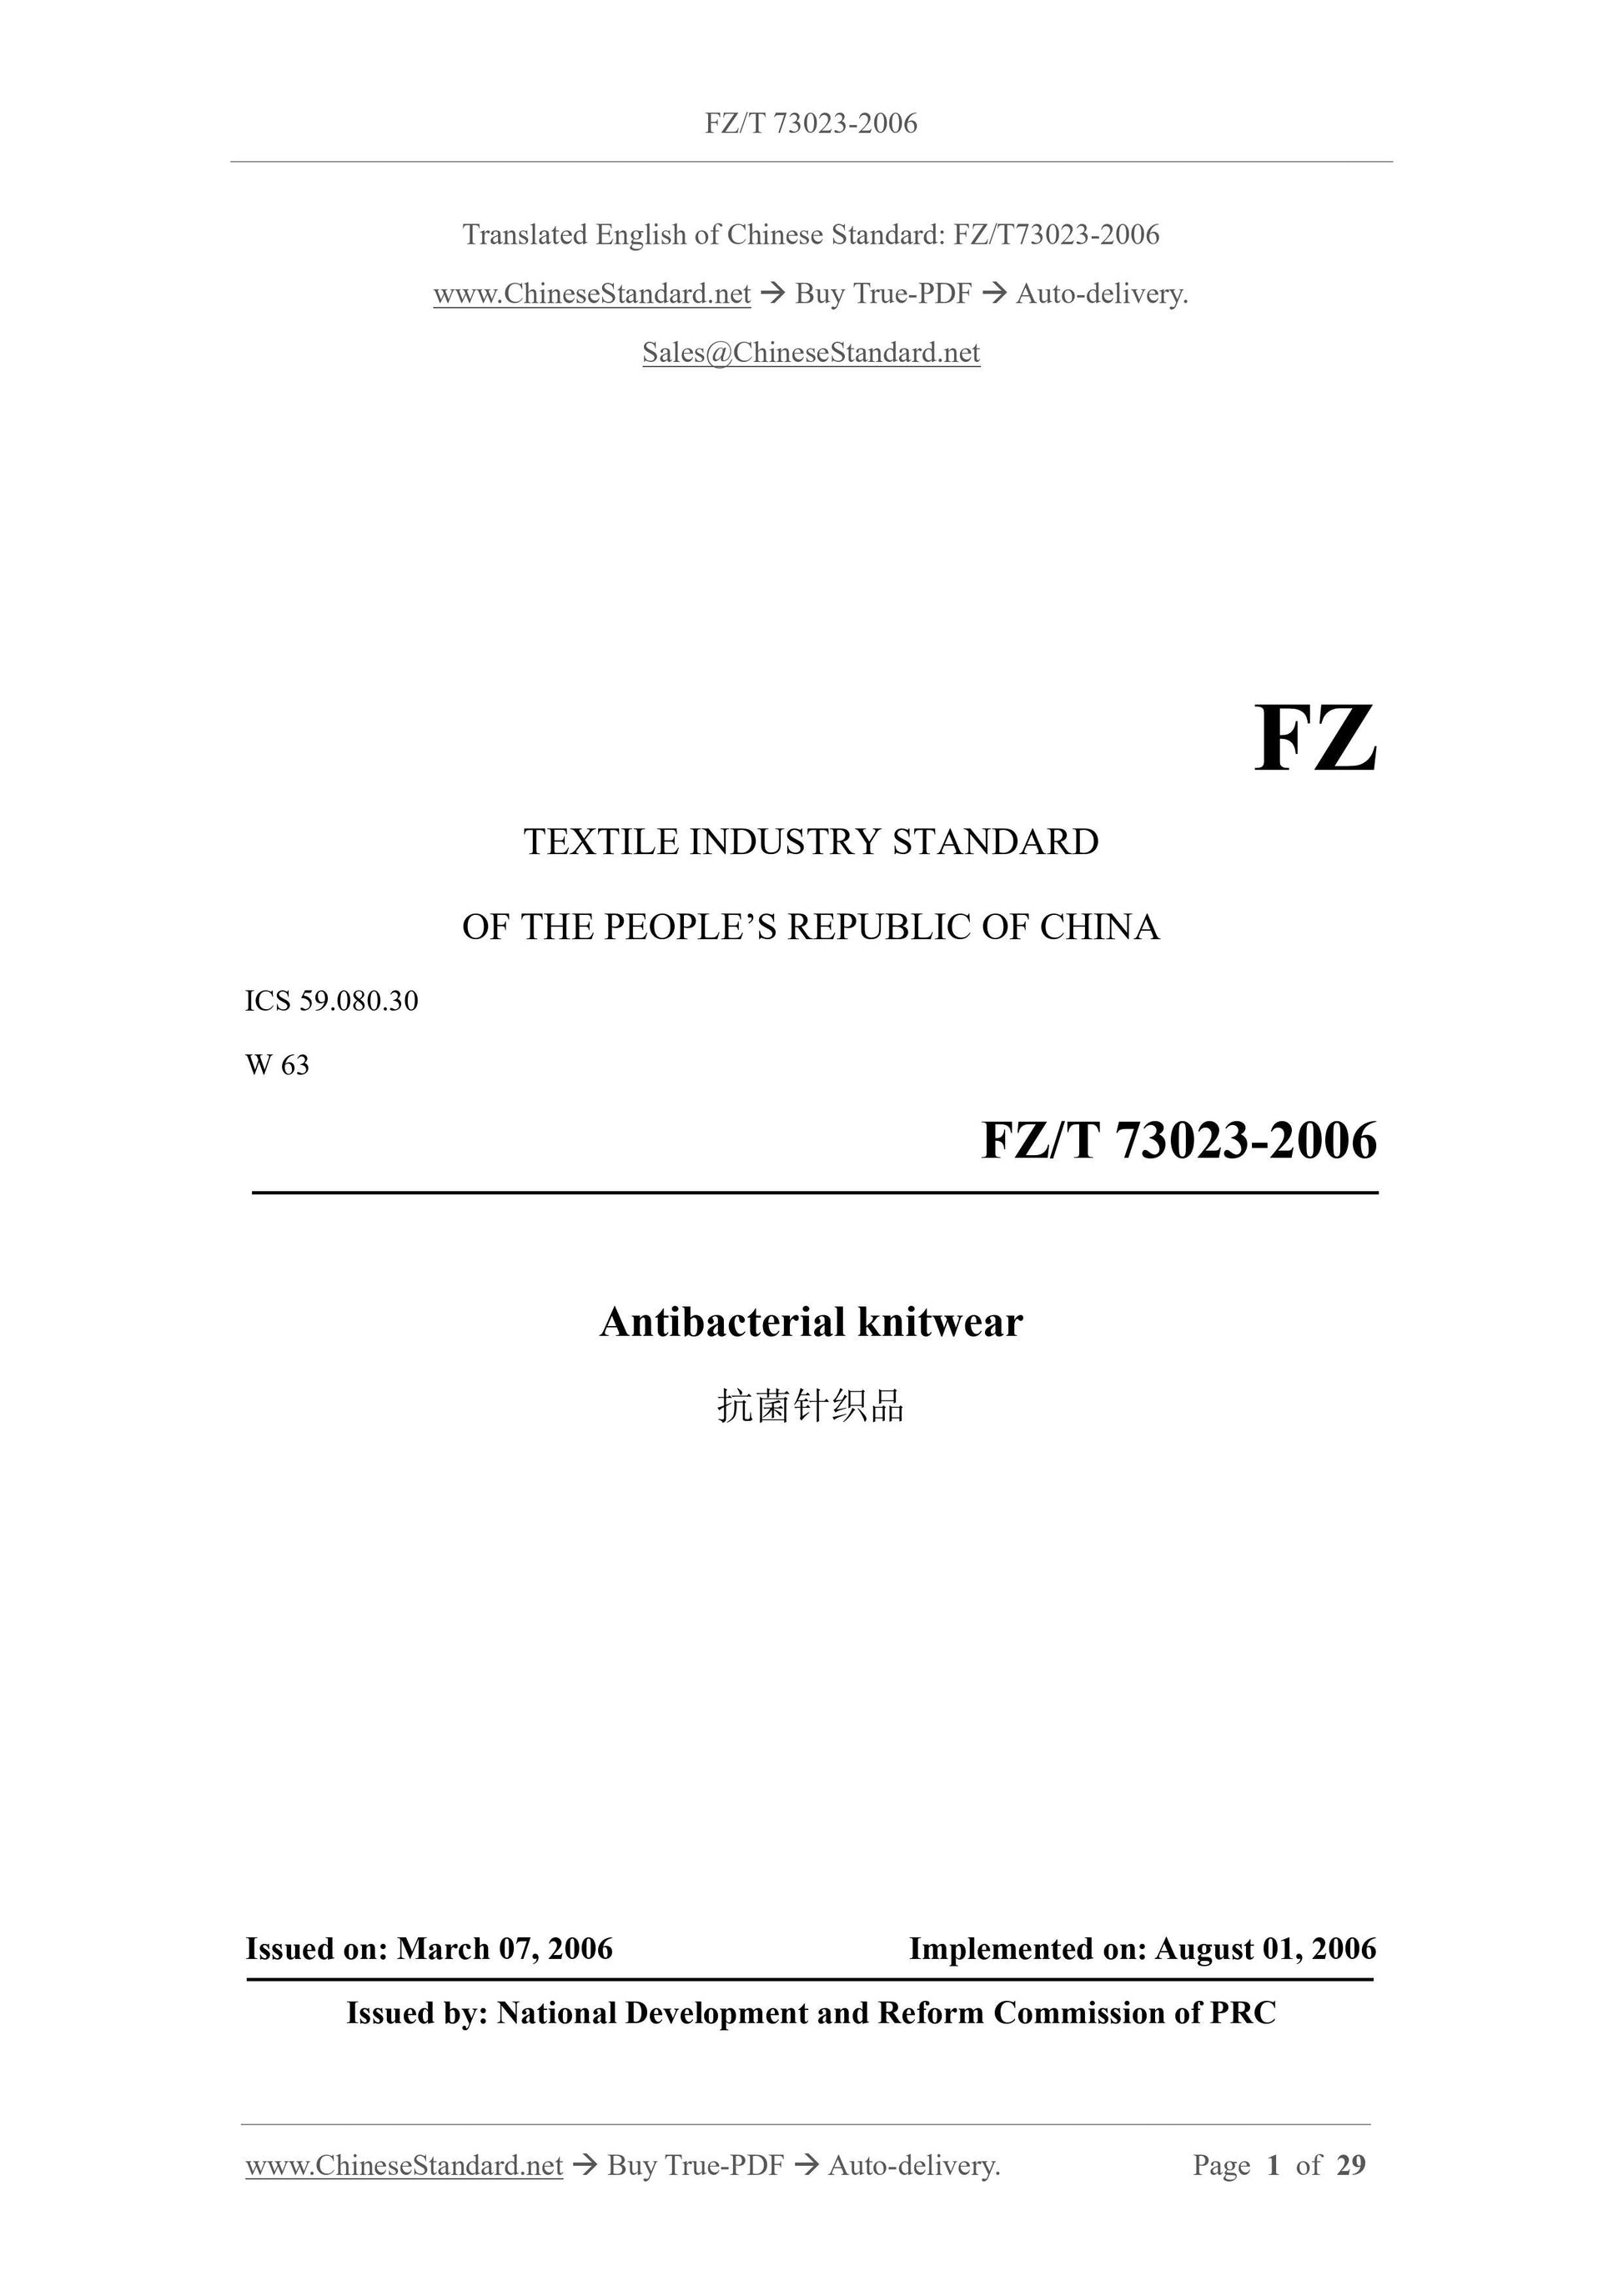 FZ/T 73023-2006 Page 1